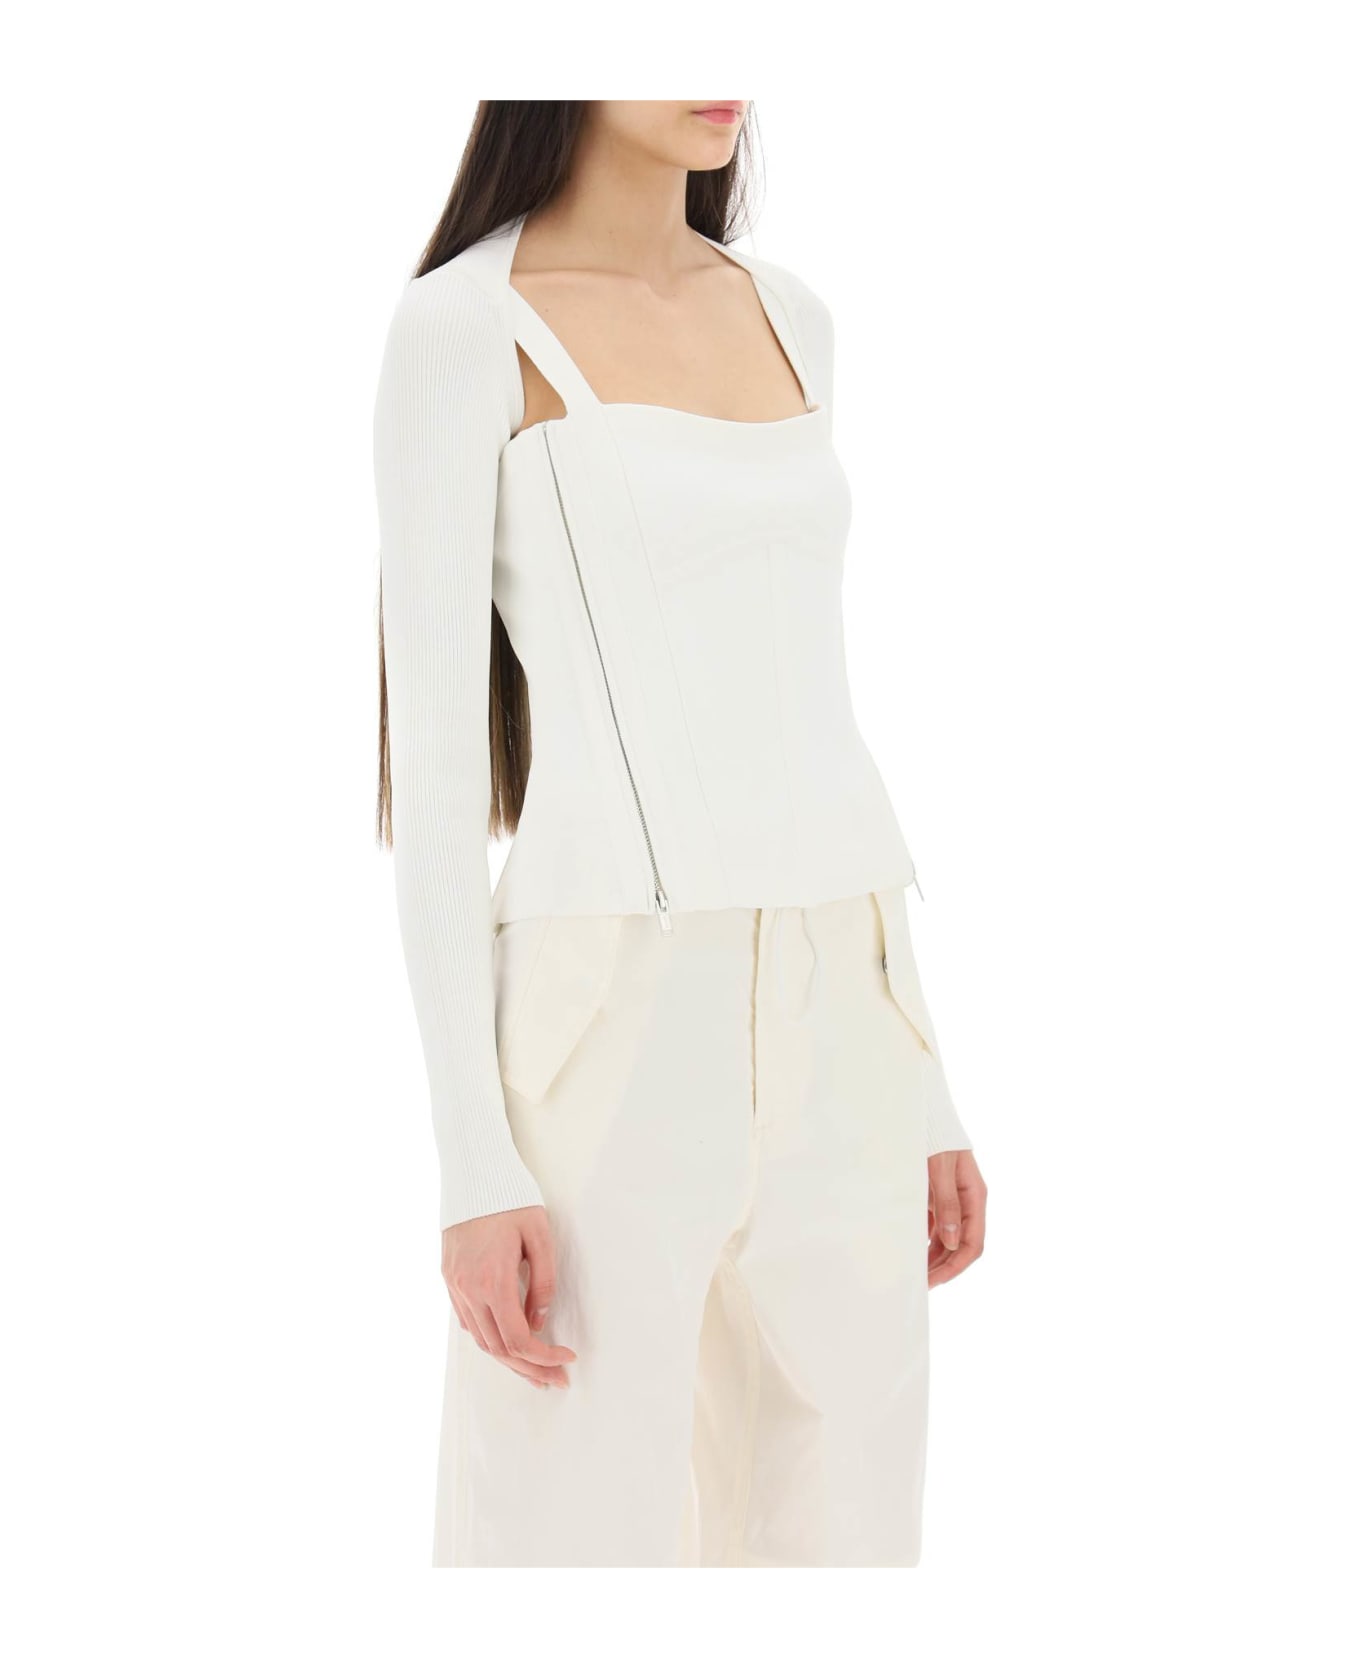 Dion Lee Modular Corset Top - IVORY (White)